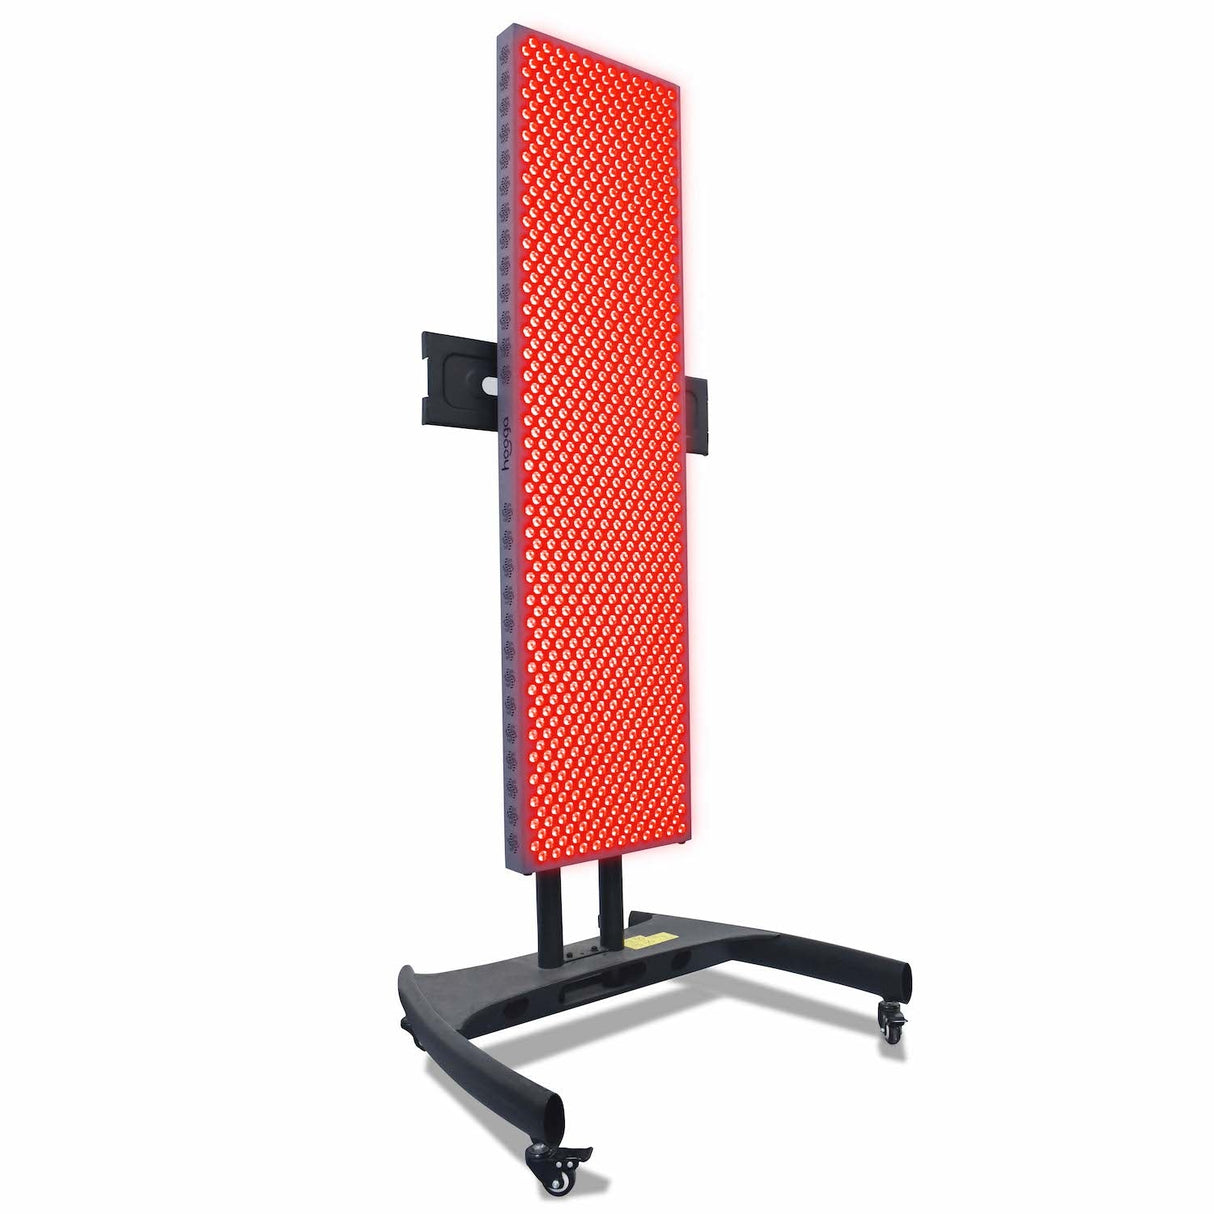 Hooga PRO4500 Full Body Red Light Therapy Devices